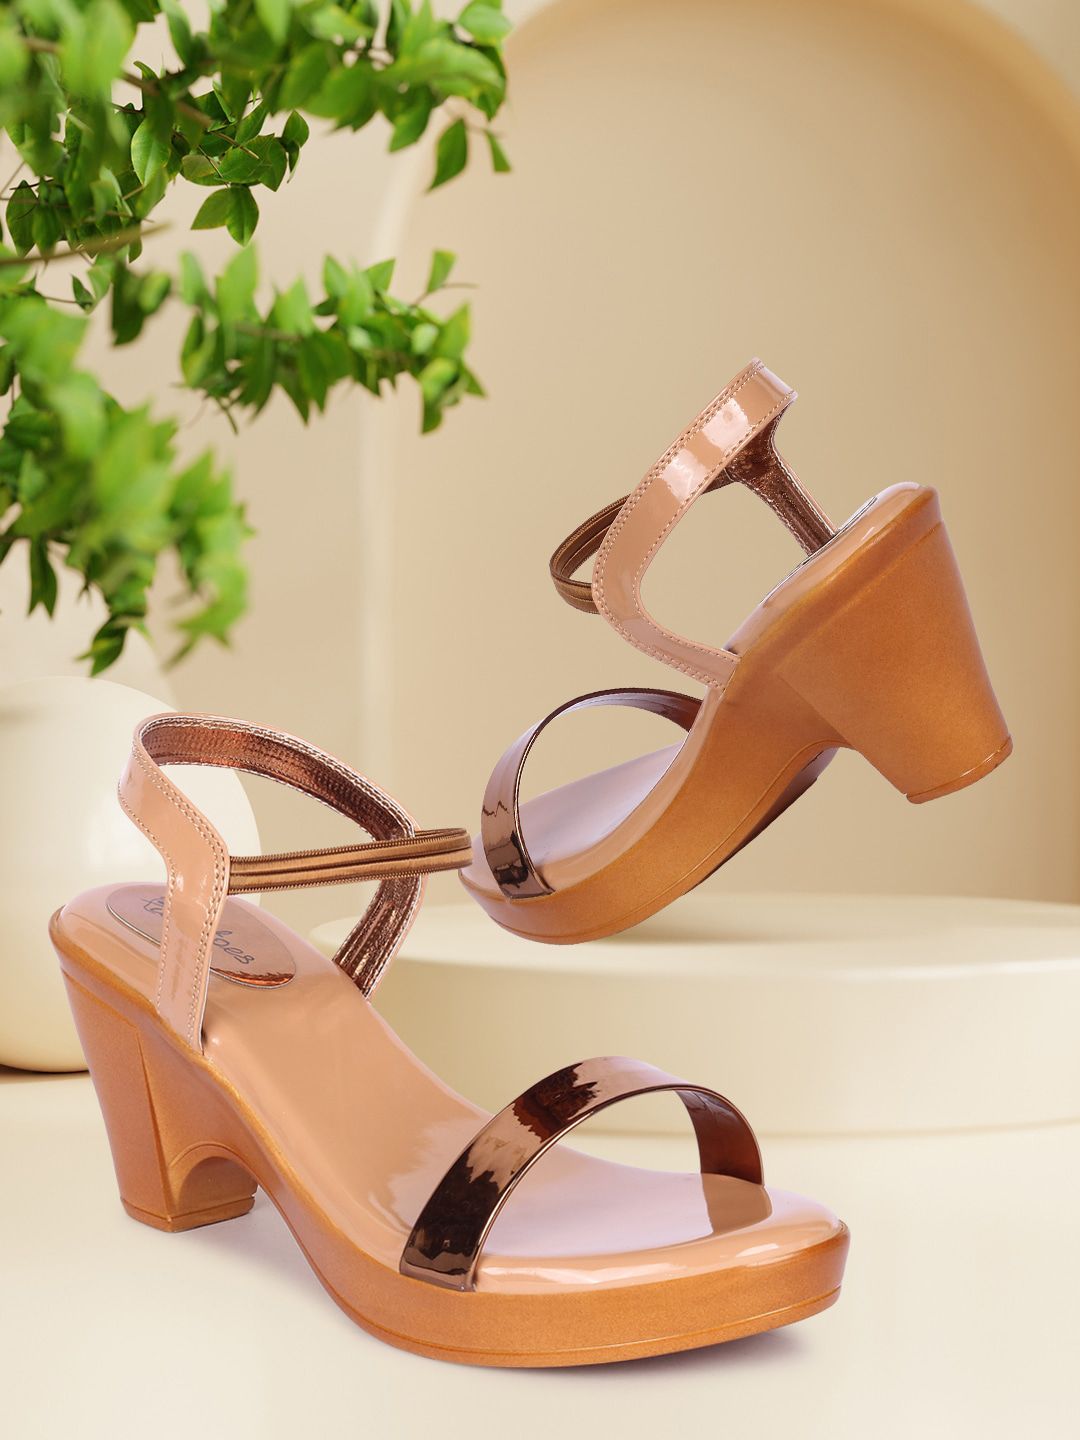 Picktoes Copper-Toned Block Sandals with Buckles Price in India